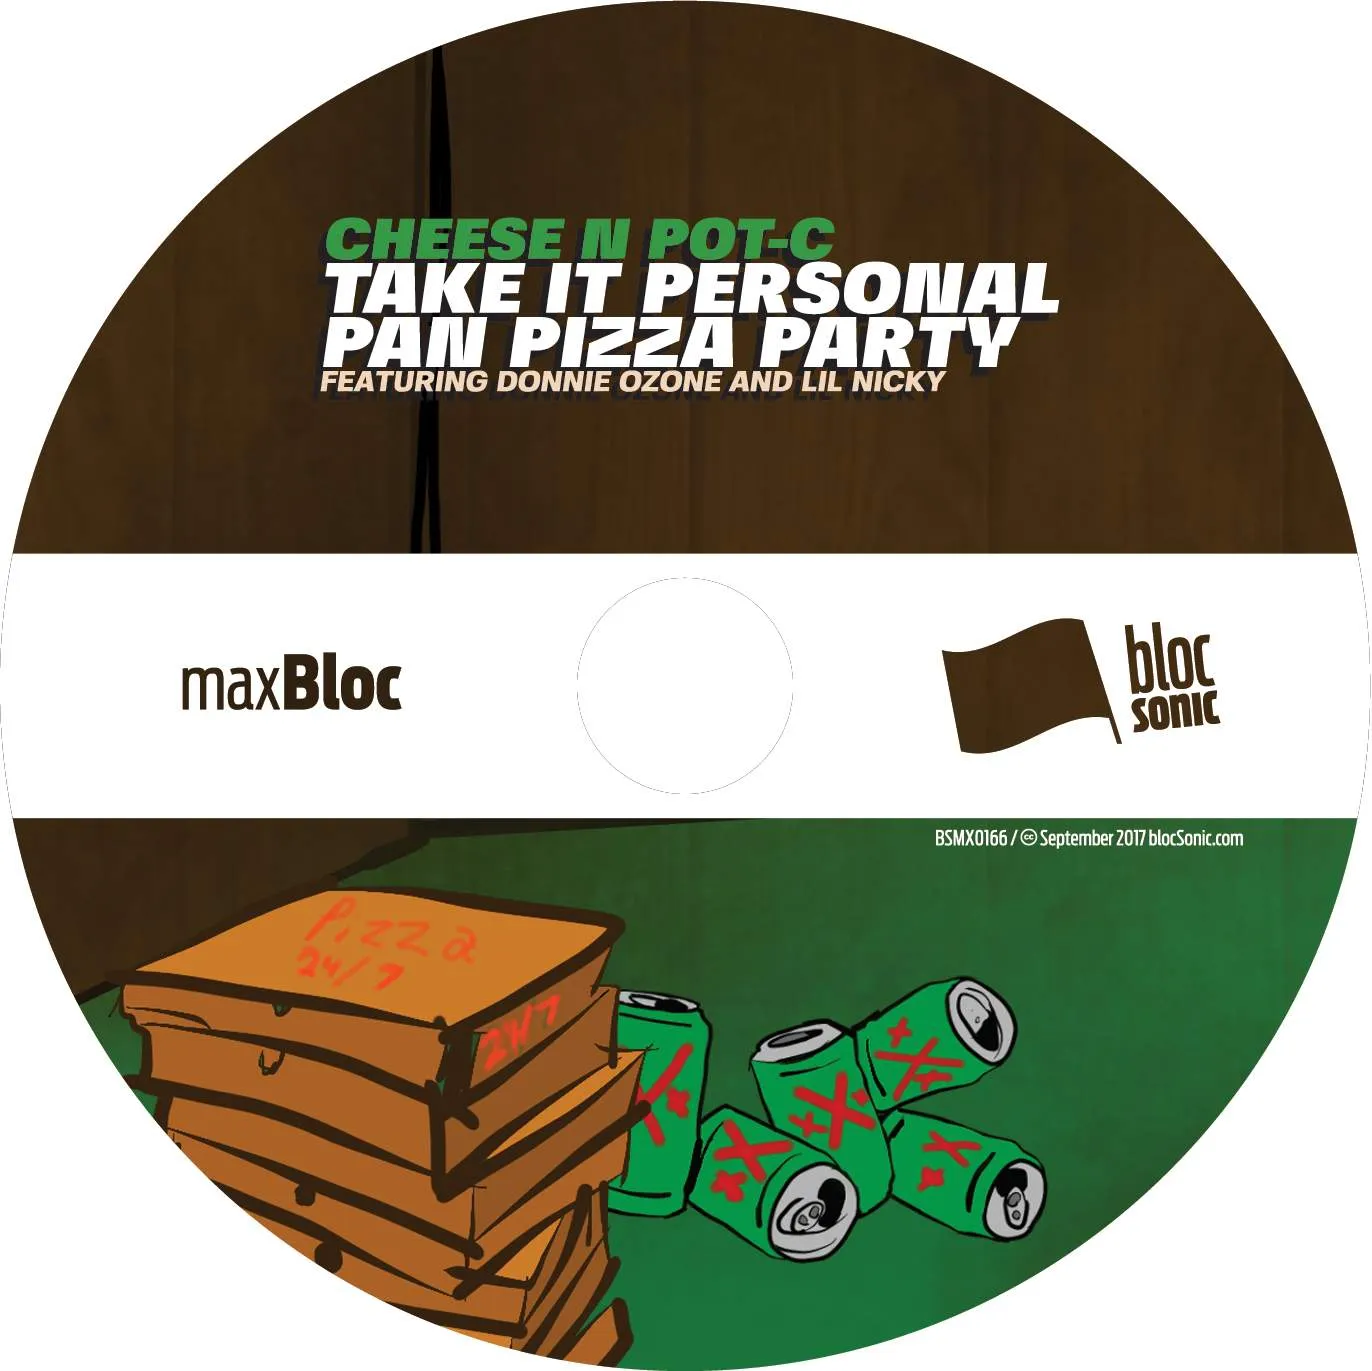 Album disc for “Take It Personal Pan Pizza Party (Featuring Donnie Ozone &amp; Lil Nicky)” by Cheese N Pot-C